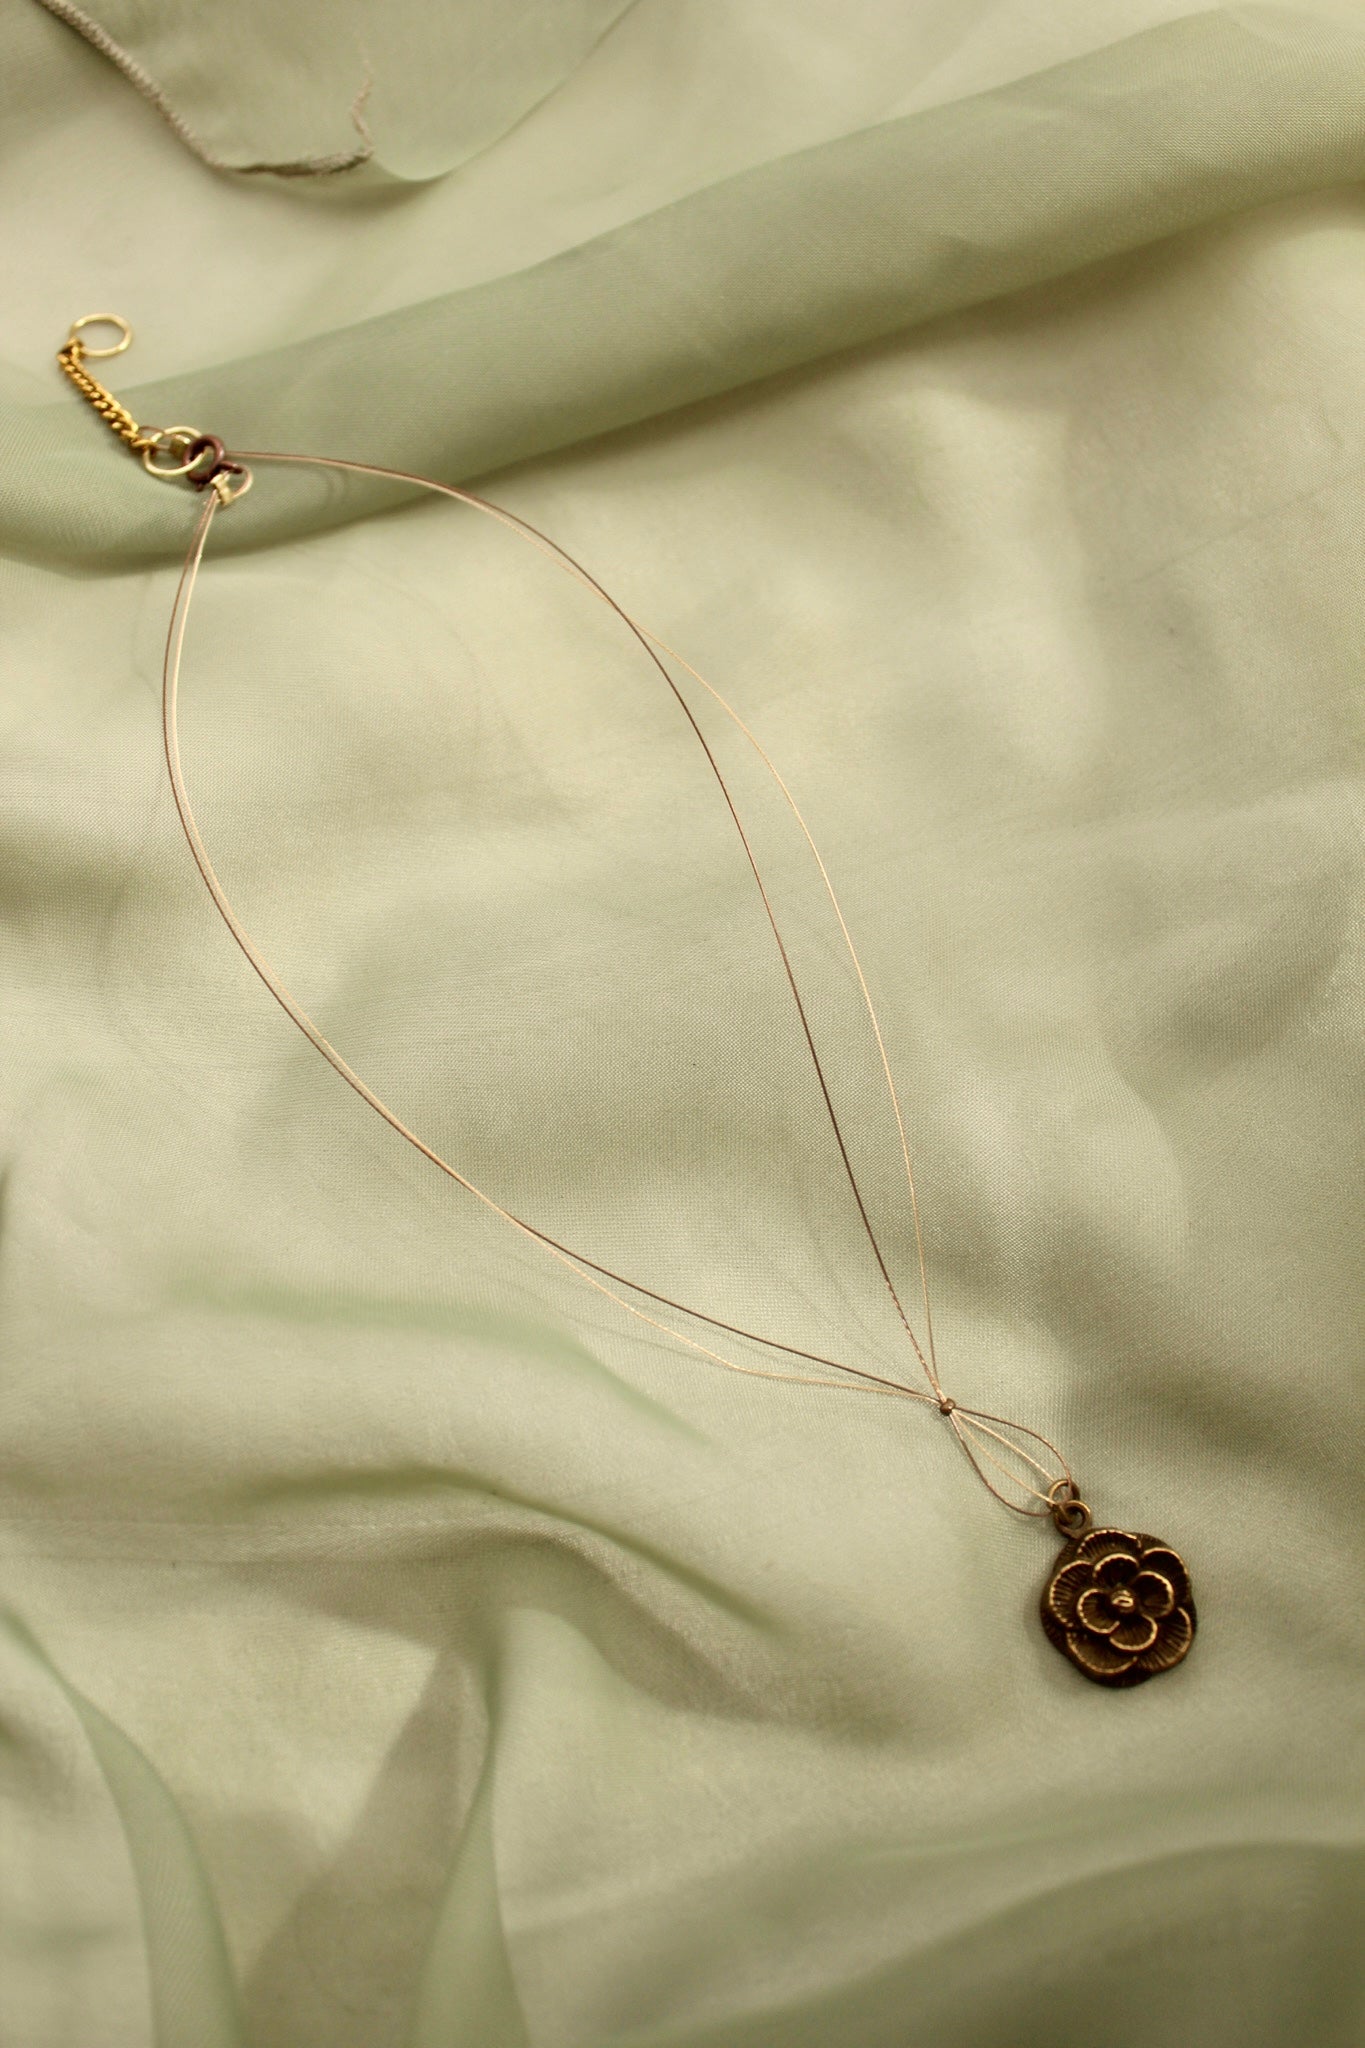 Dainty Handmade Rose Shaped with Unique Double Fine Cord Necklace